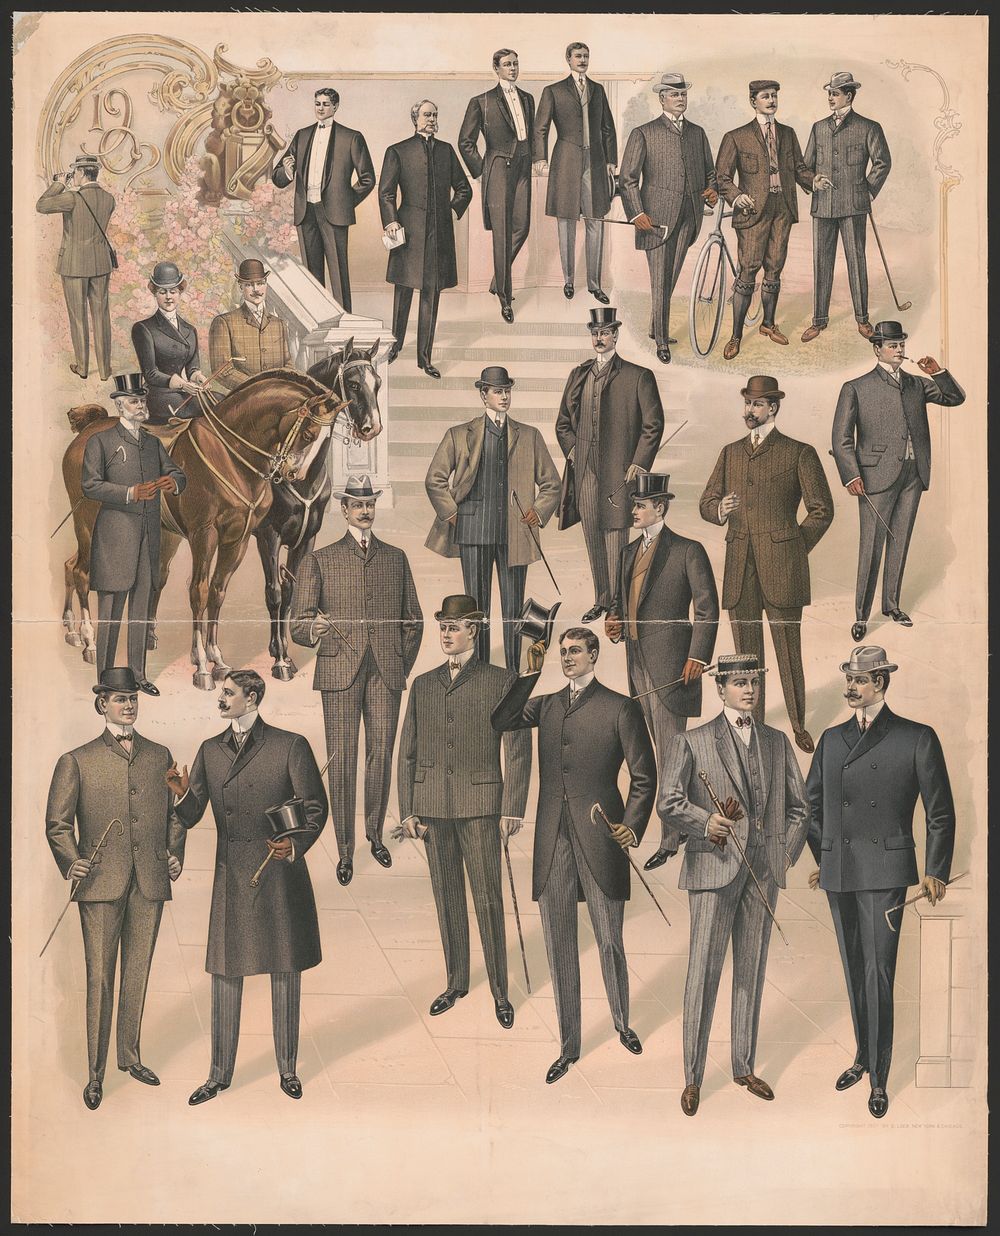 [Men wearing a variety of clothing styles and fashions, man and woman on horseback]